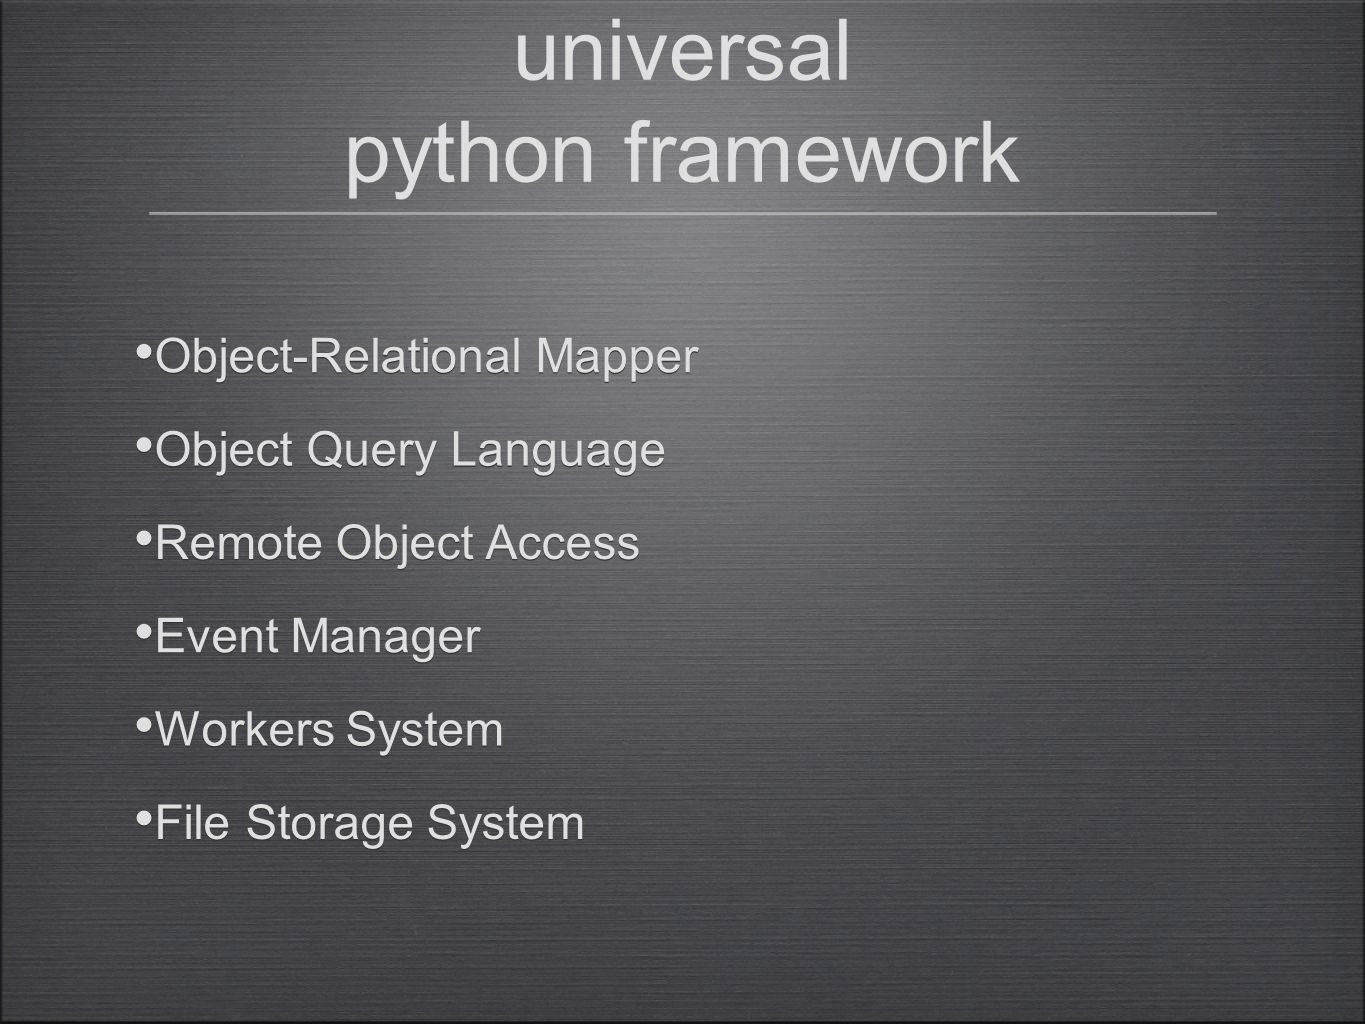 universal python framework Event Manager Remote Object Access Object Query Language Object-Relational Mapper Workers System File Storage System